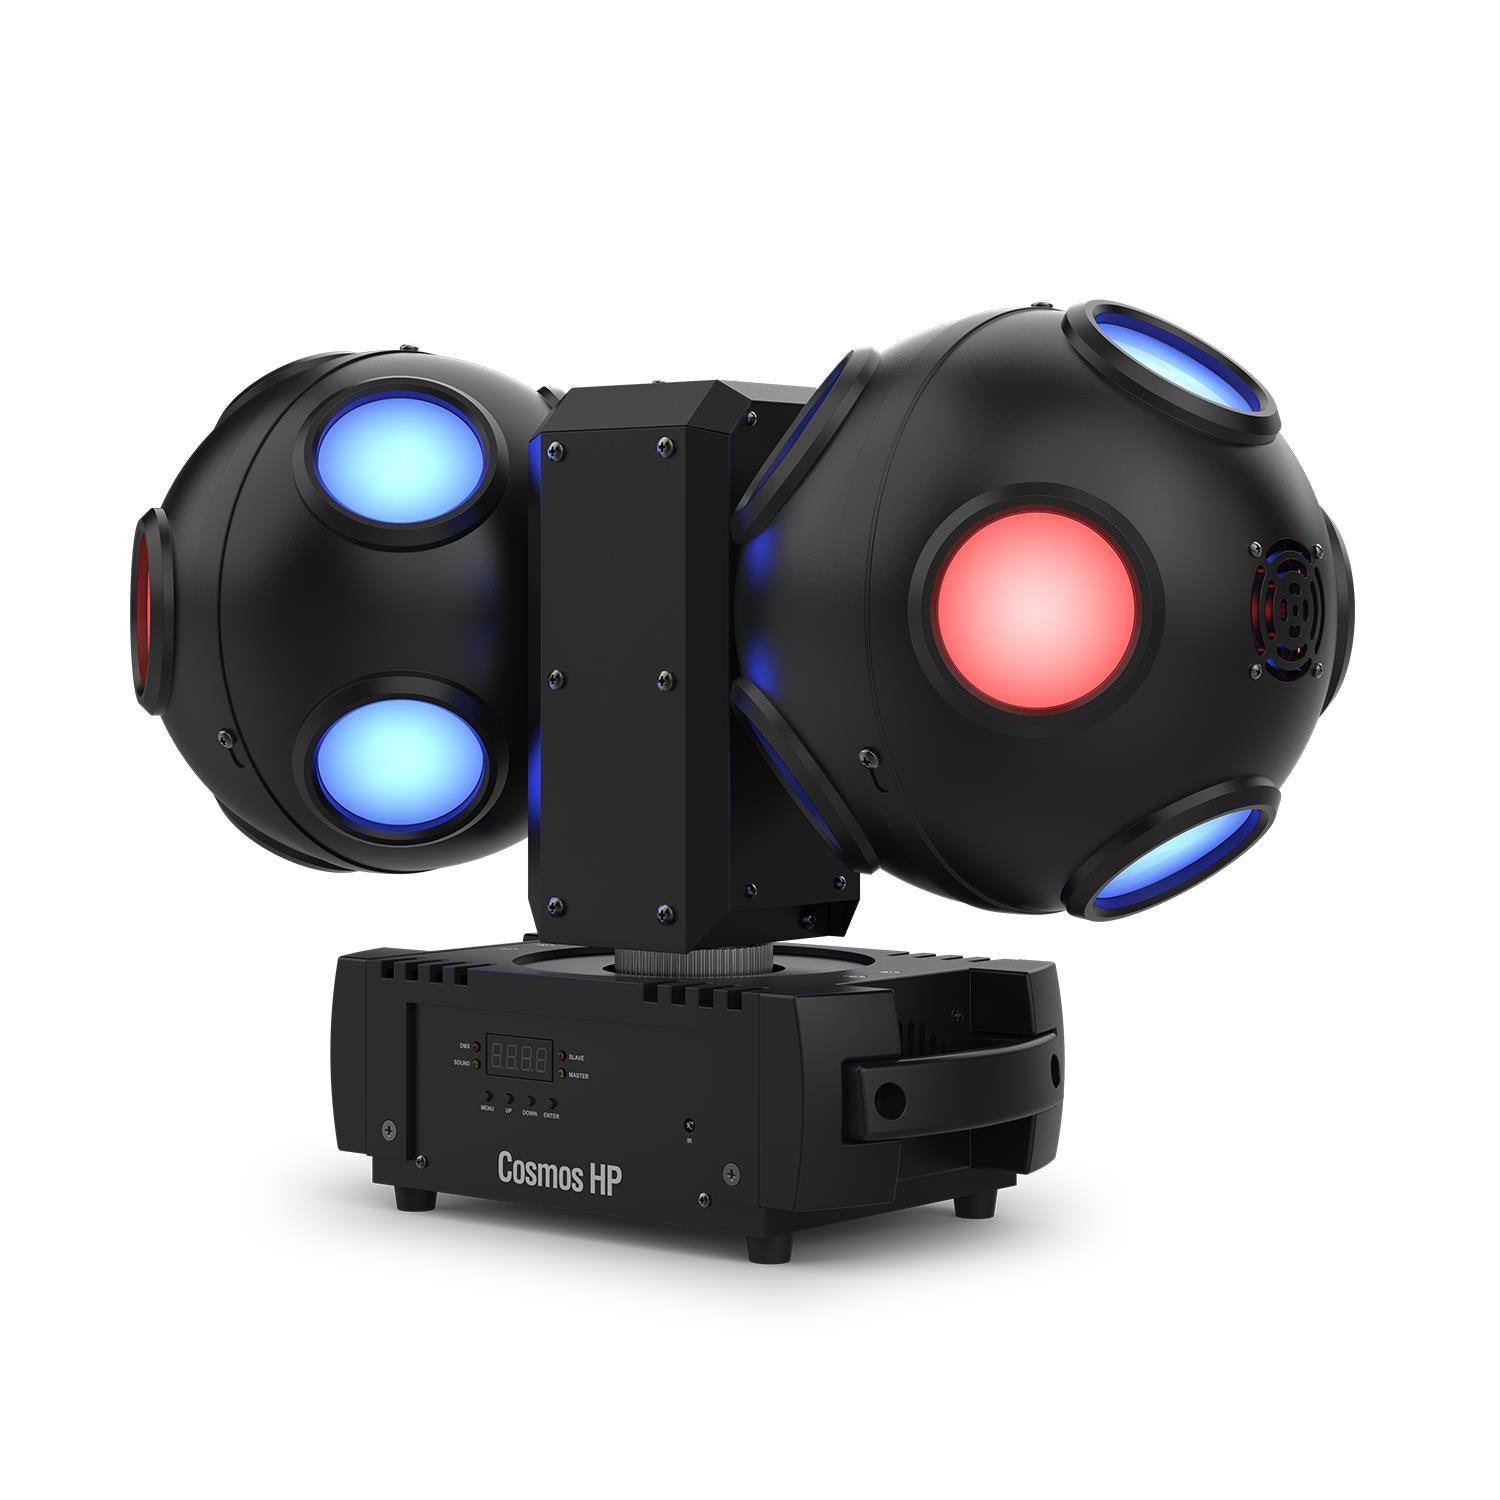 2 x Chauvet DJ Cosmos HP RGBW Rotating Effect Light with DMX Cable - DY Pro Audio